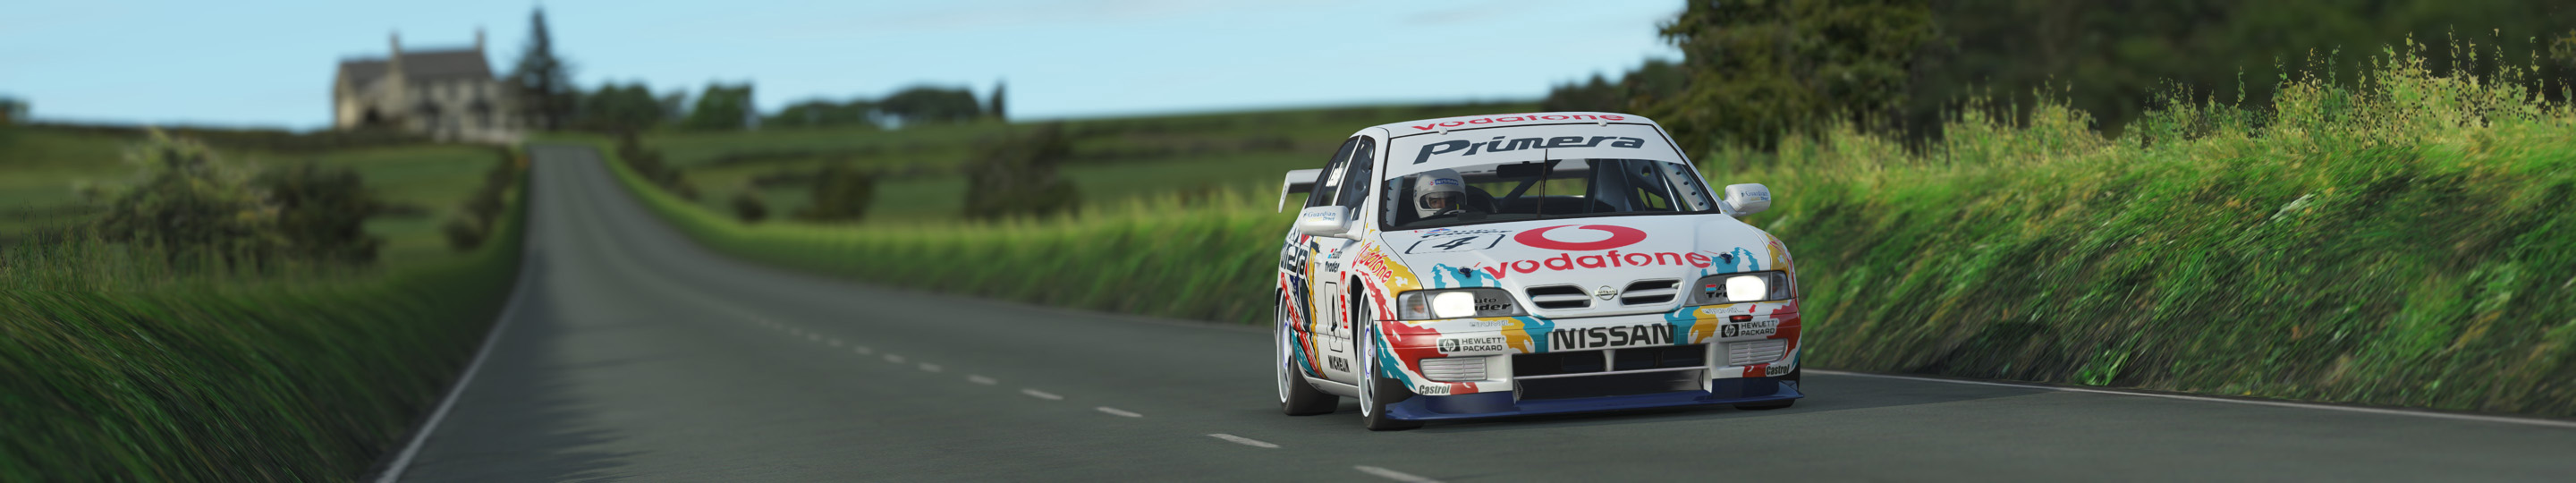 5 rFACTOR 2 ISLE of MAN by JIM PEARSON with NISSAN PRIMERA copy.jpg